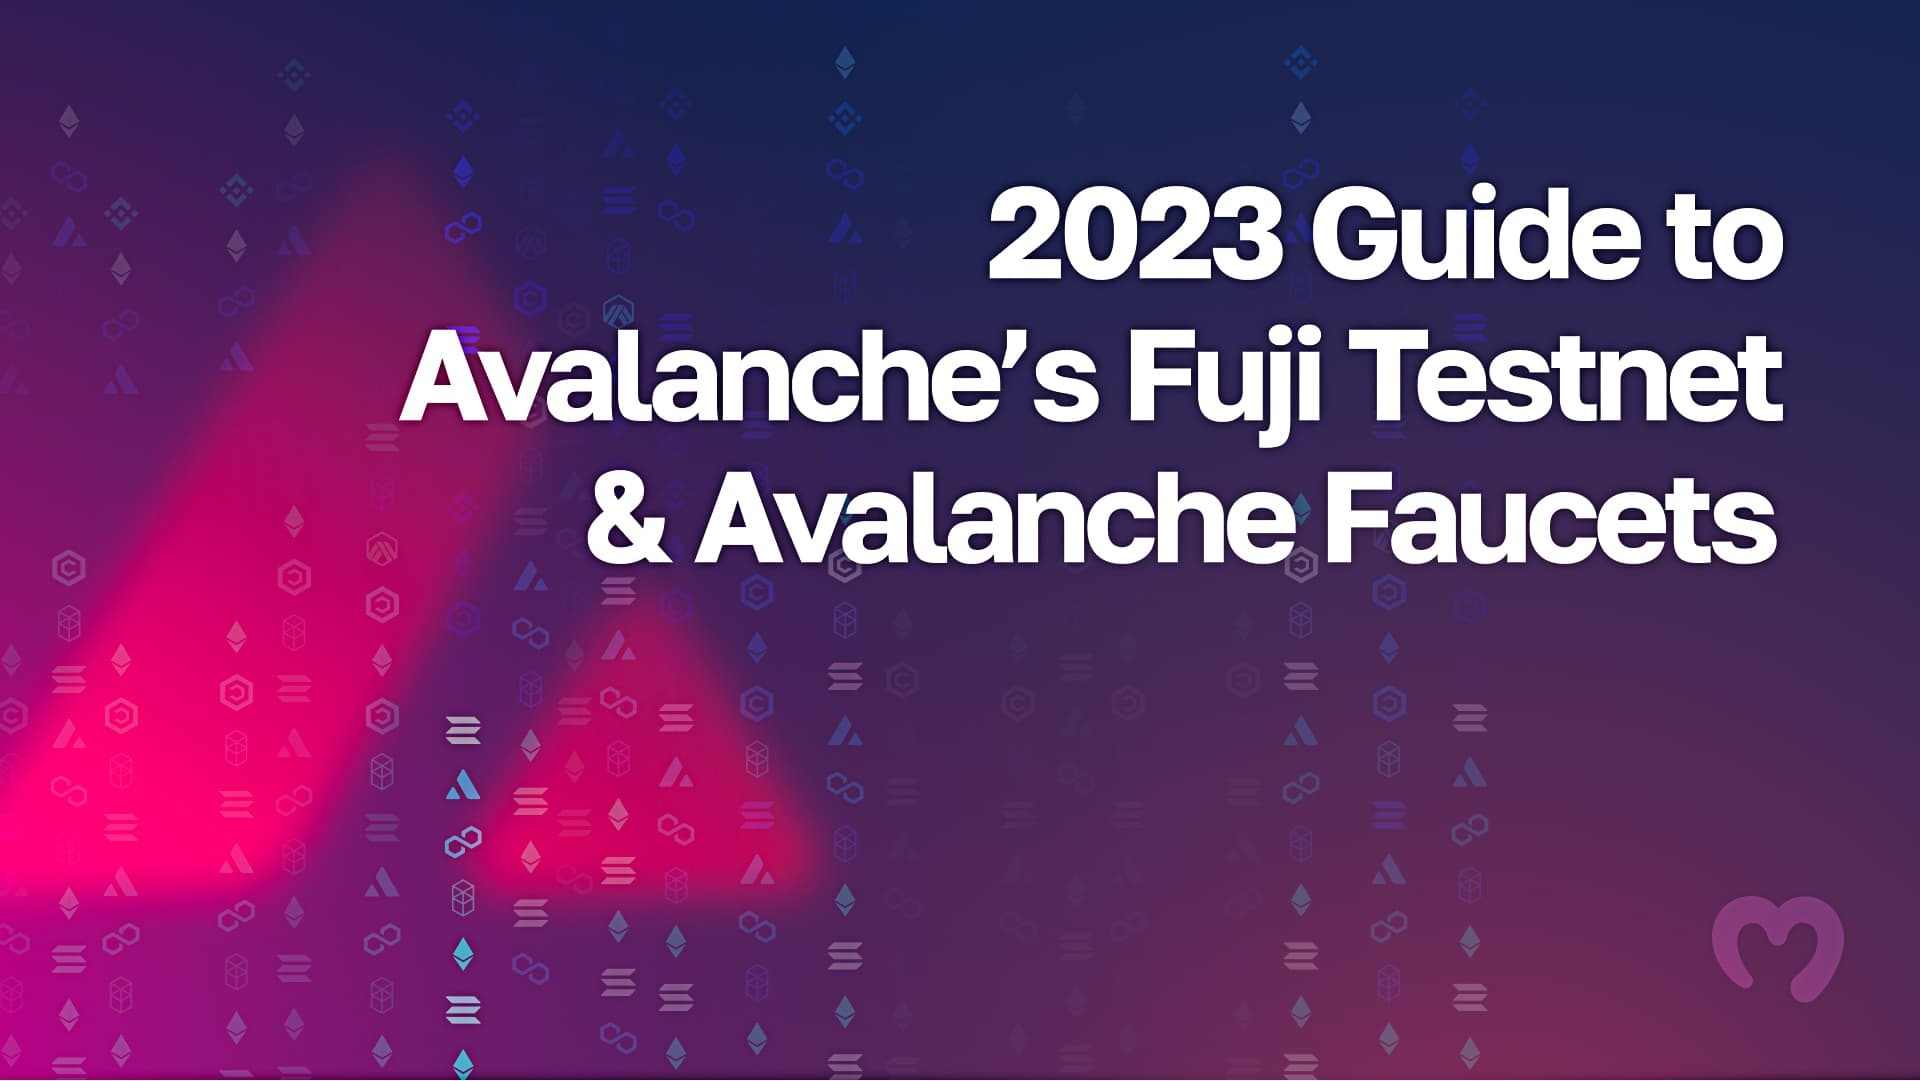 The 2023 Guide to Avalanche’s Fuji Testnet & Avalanche Faucets